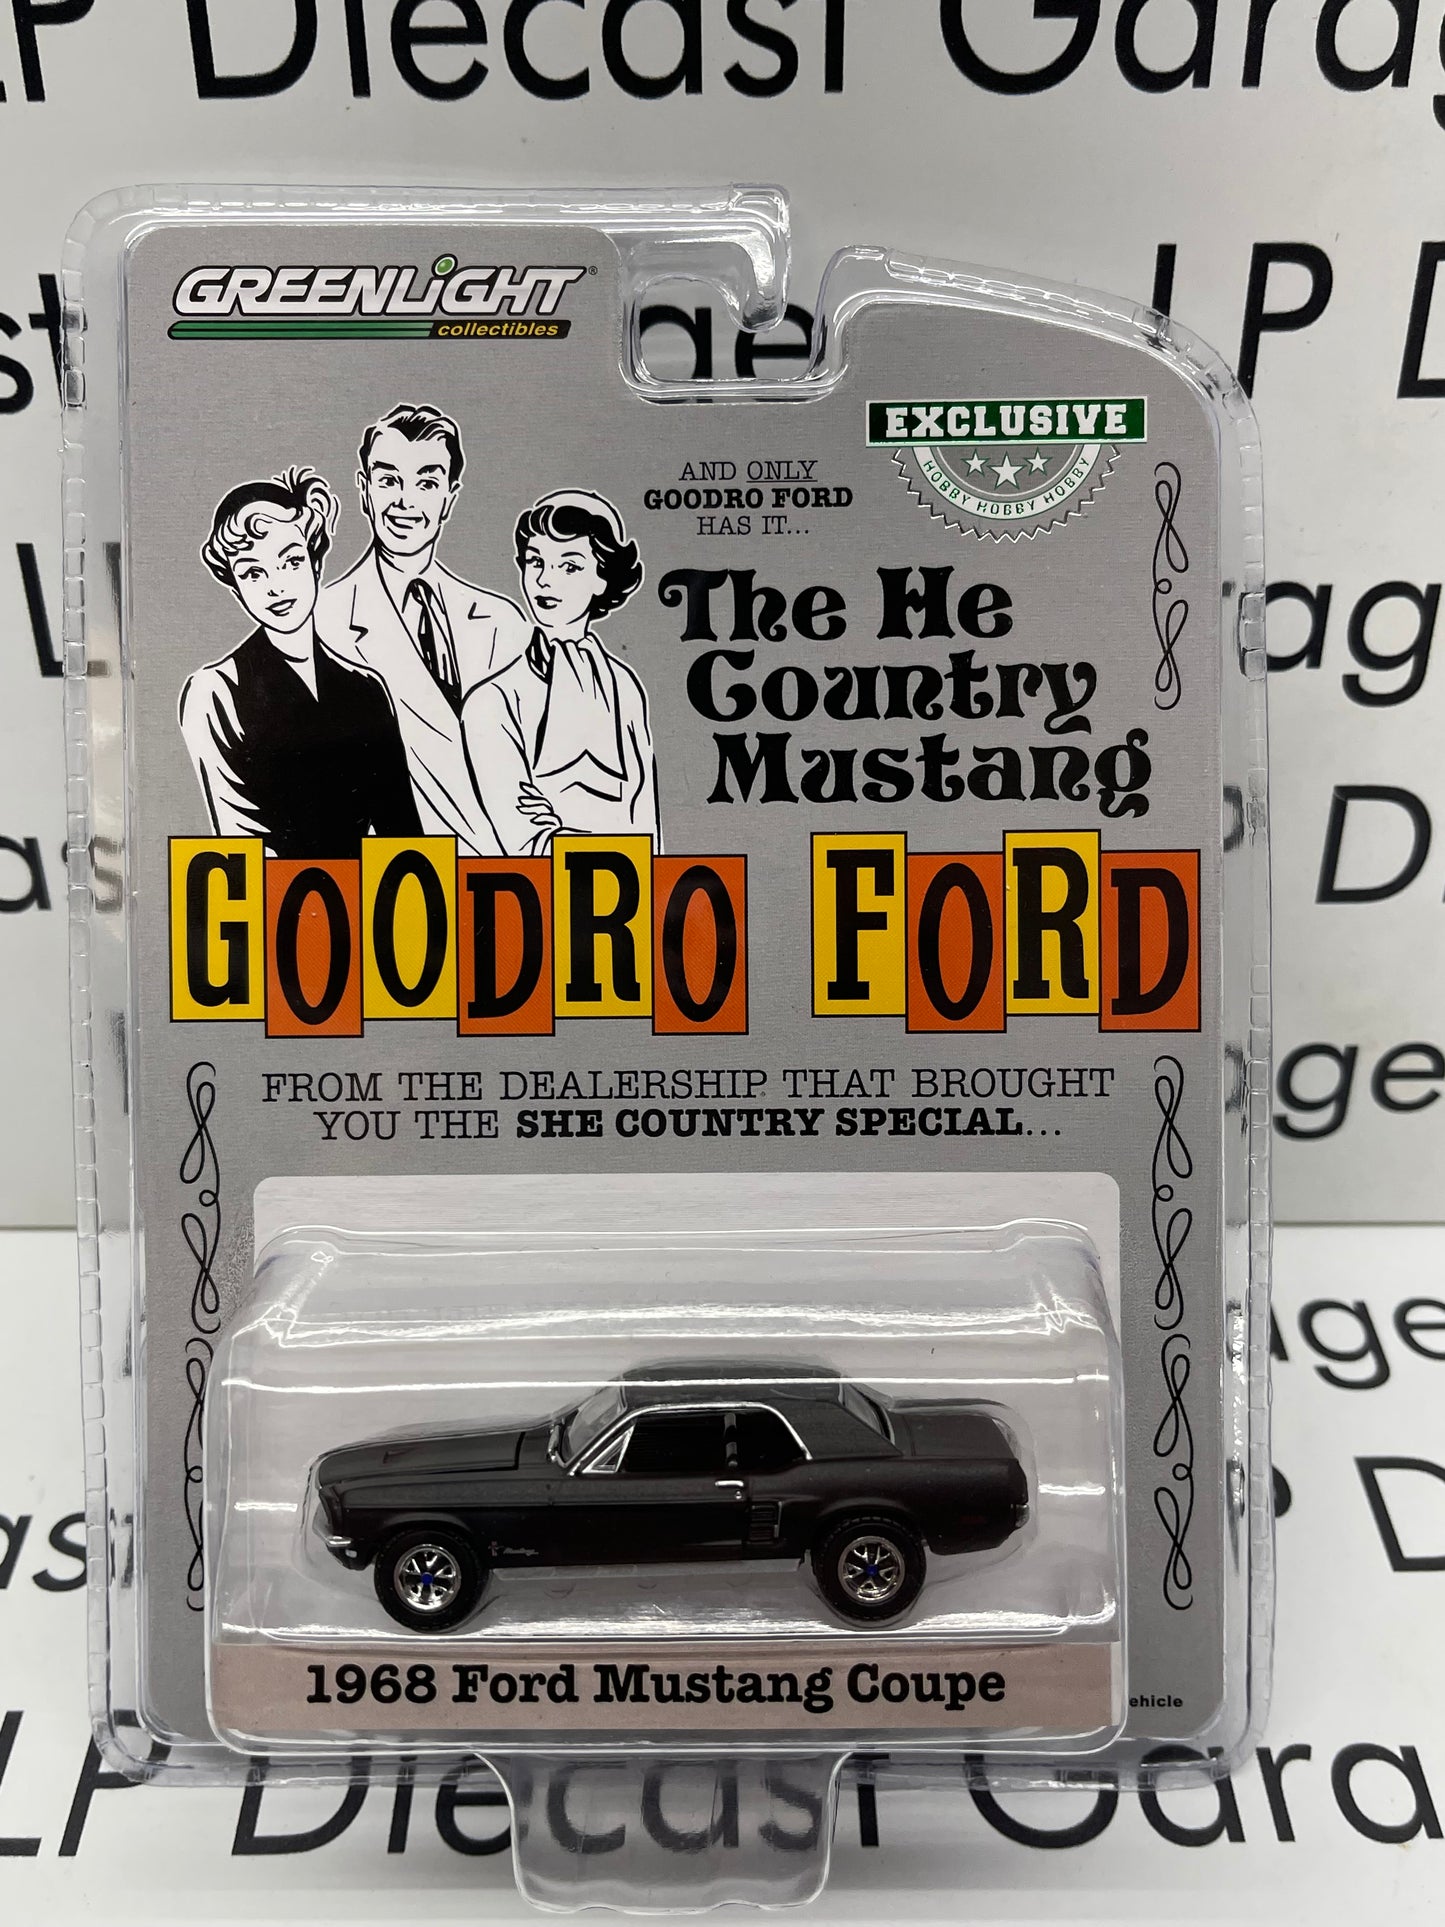 GREENLIGHT 1968 Ford Mustang Stealth Black Goodro Ford “He Country Special 1:64 Diecast